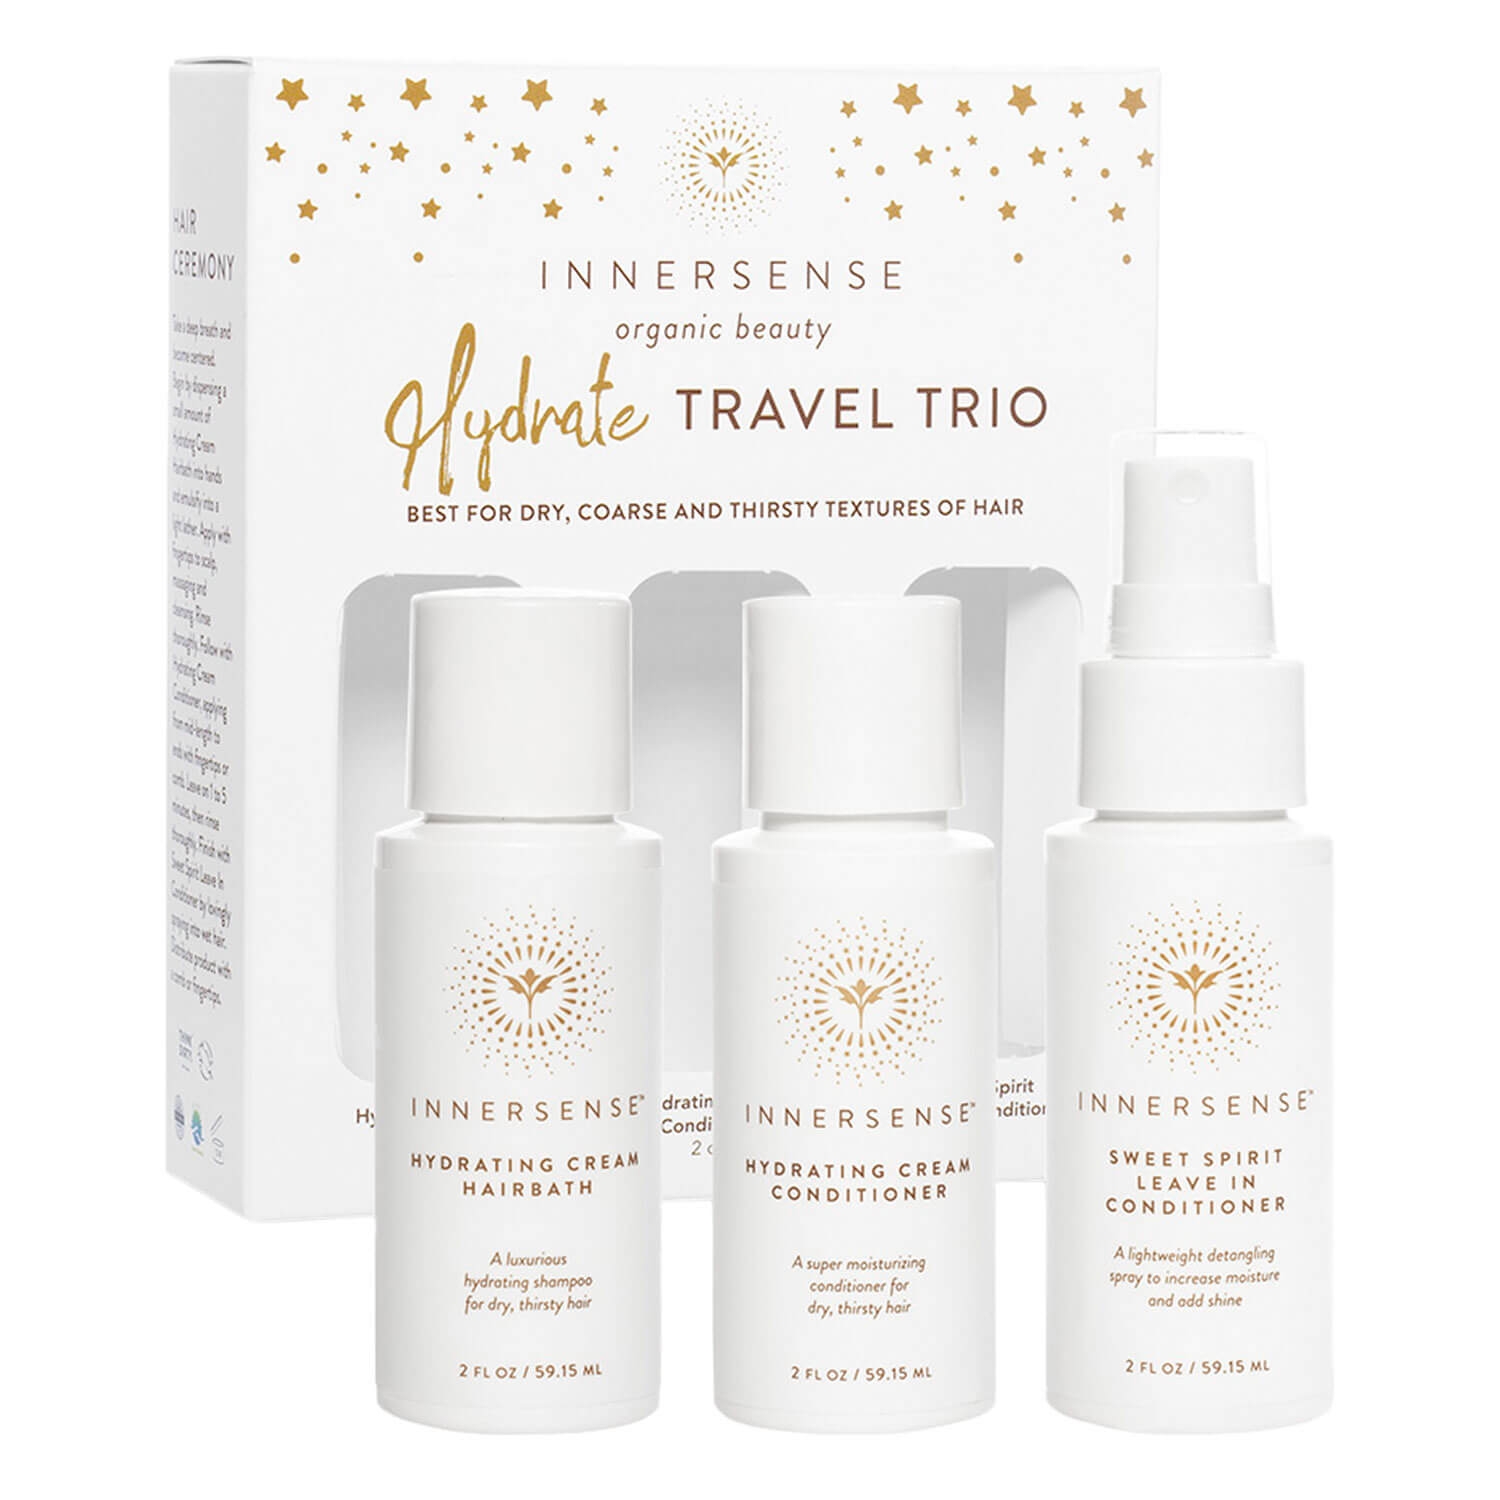 Product image from Innersense - Hydrate Travel Trio